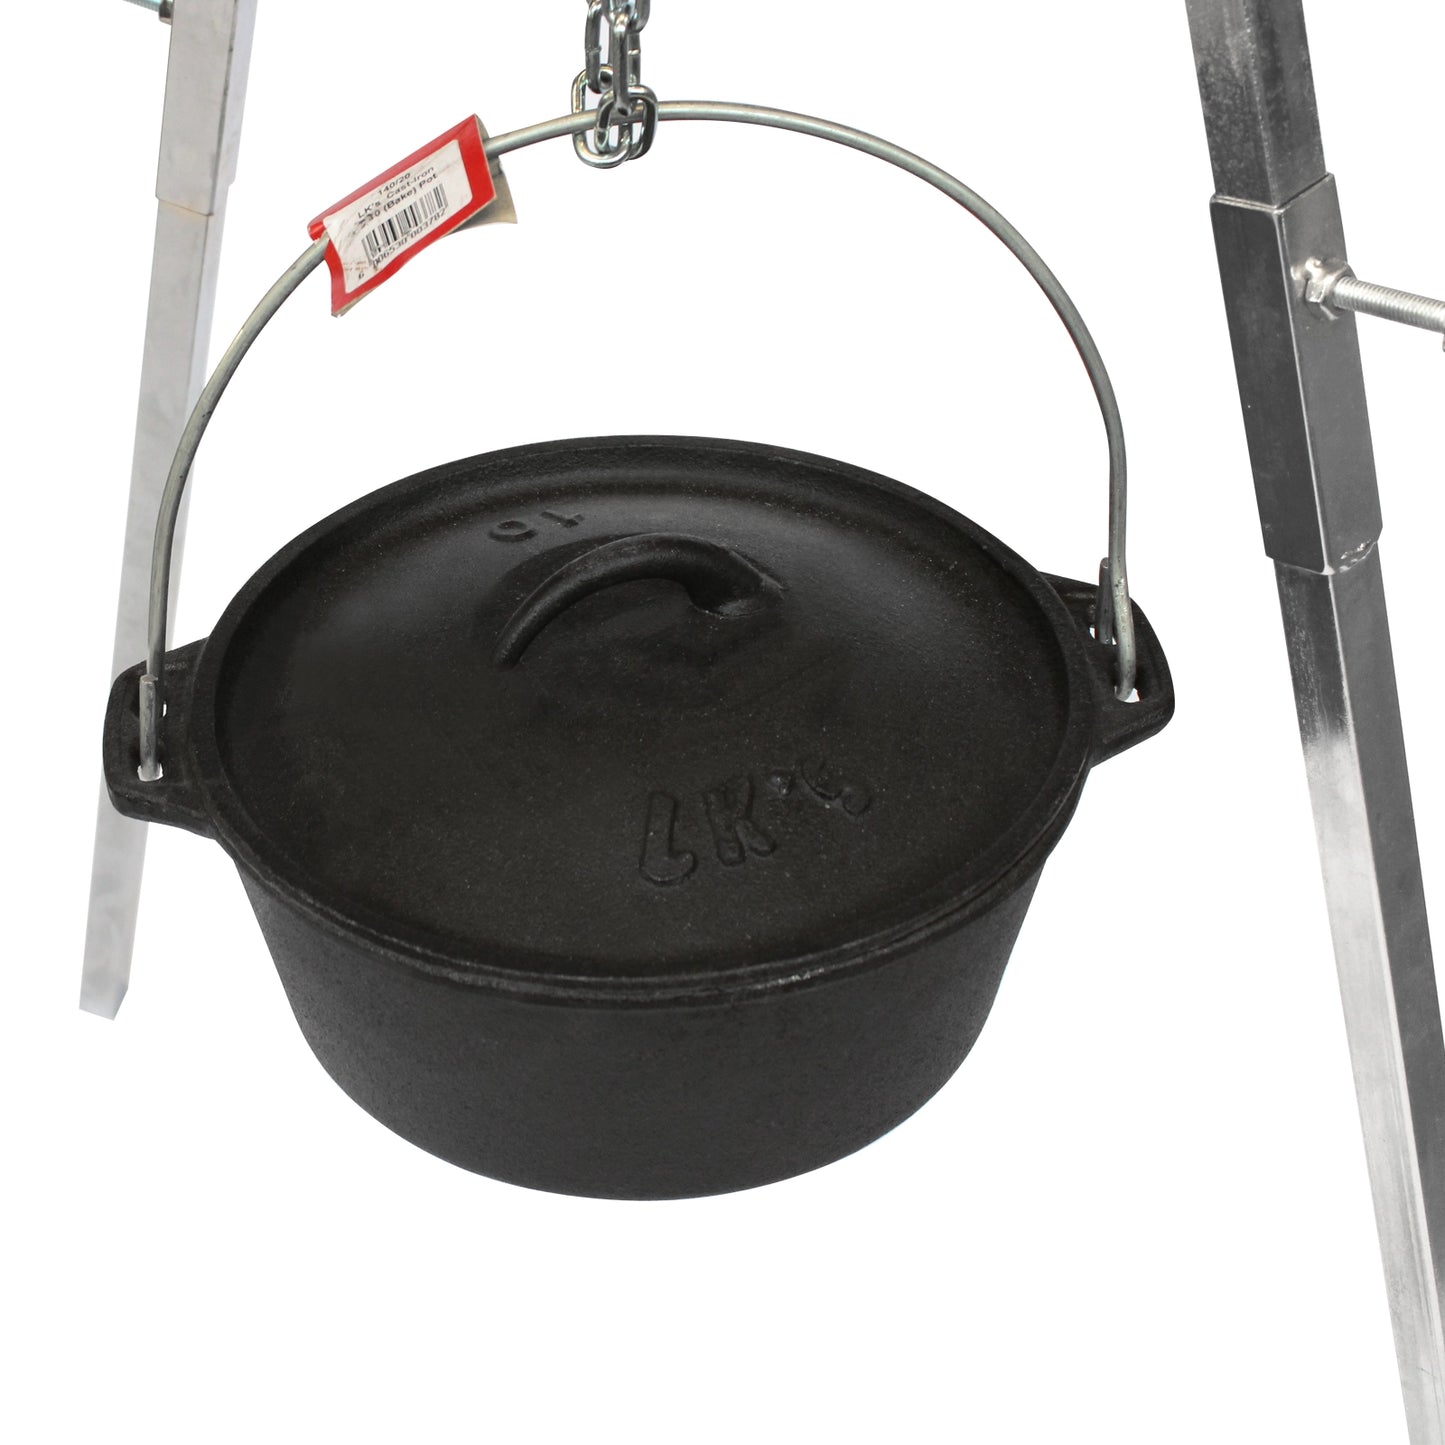 Steel Campfire Tripod with Chain to Hold Cooking Pots